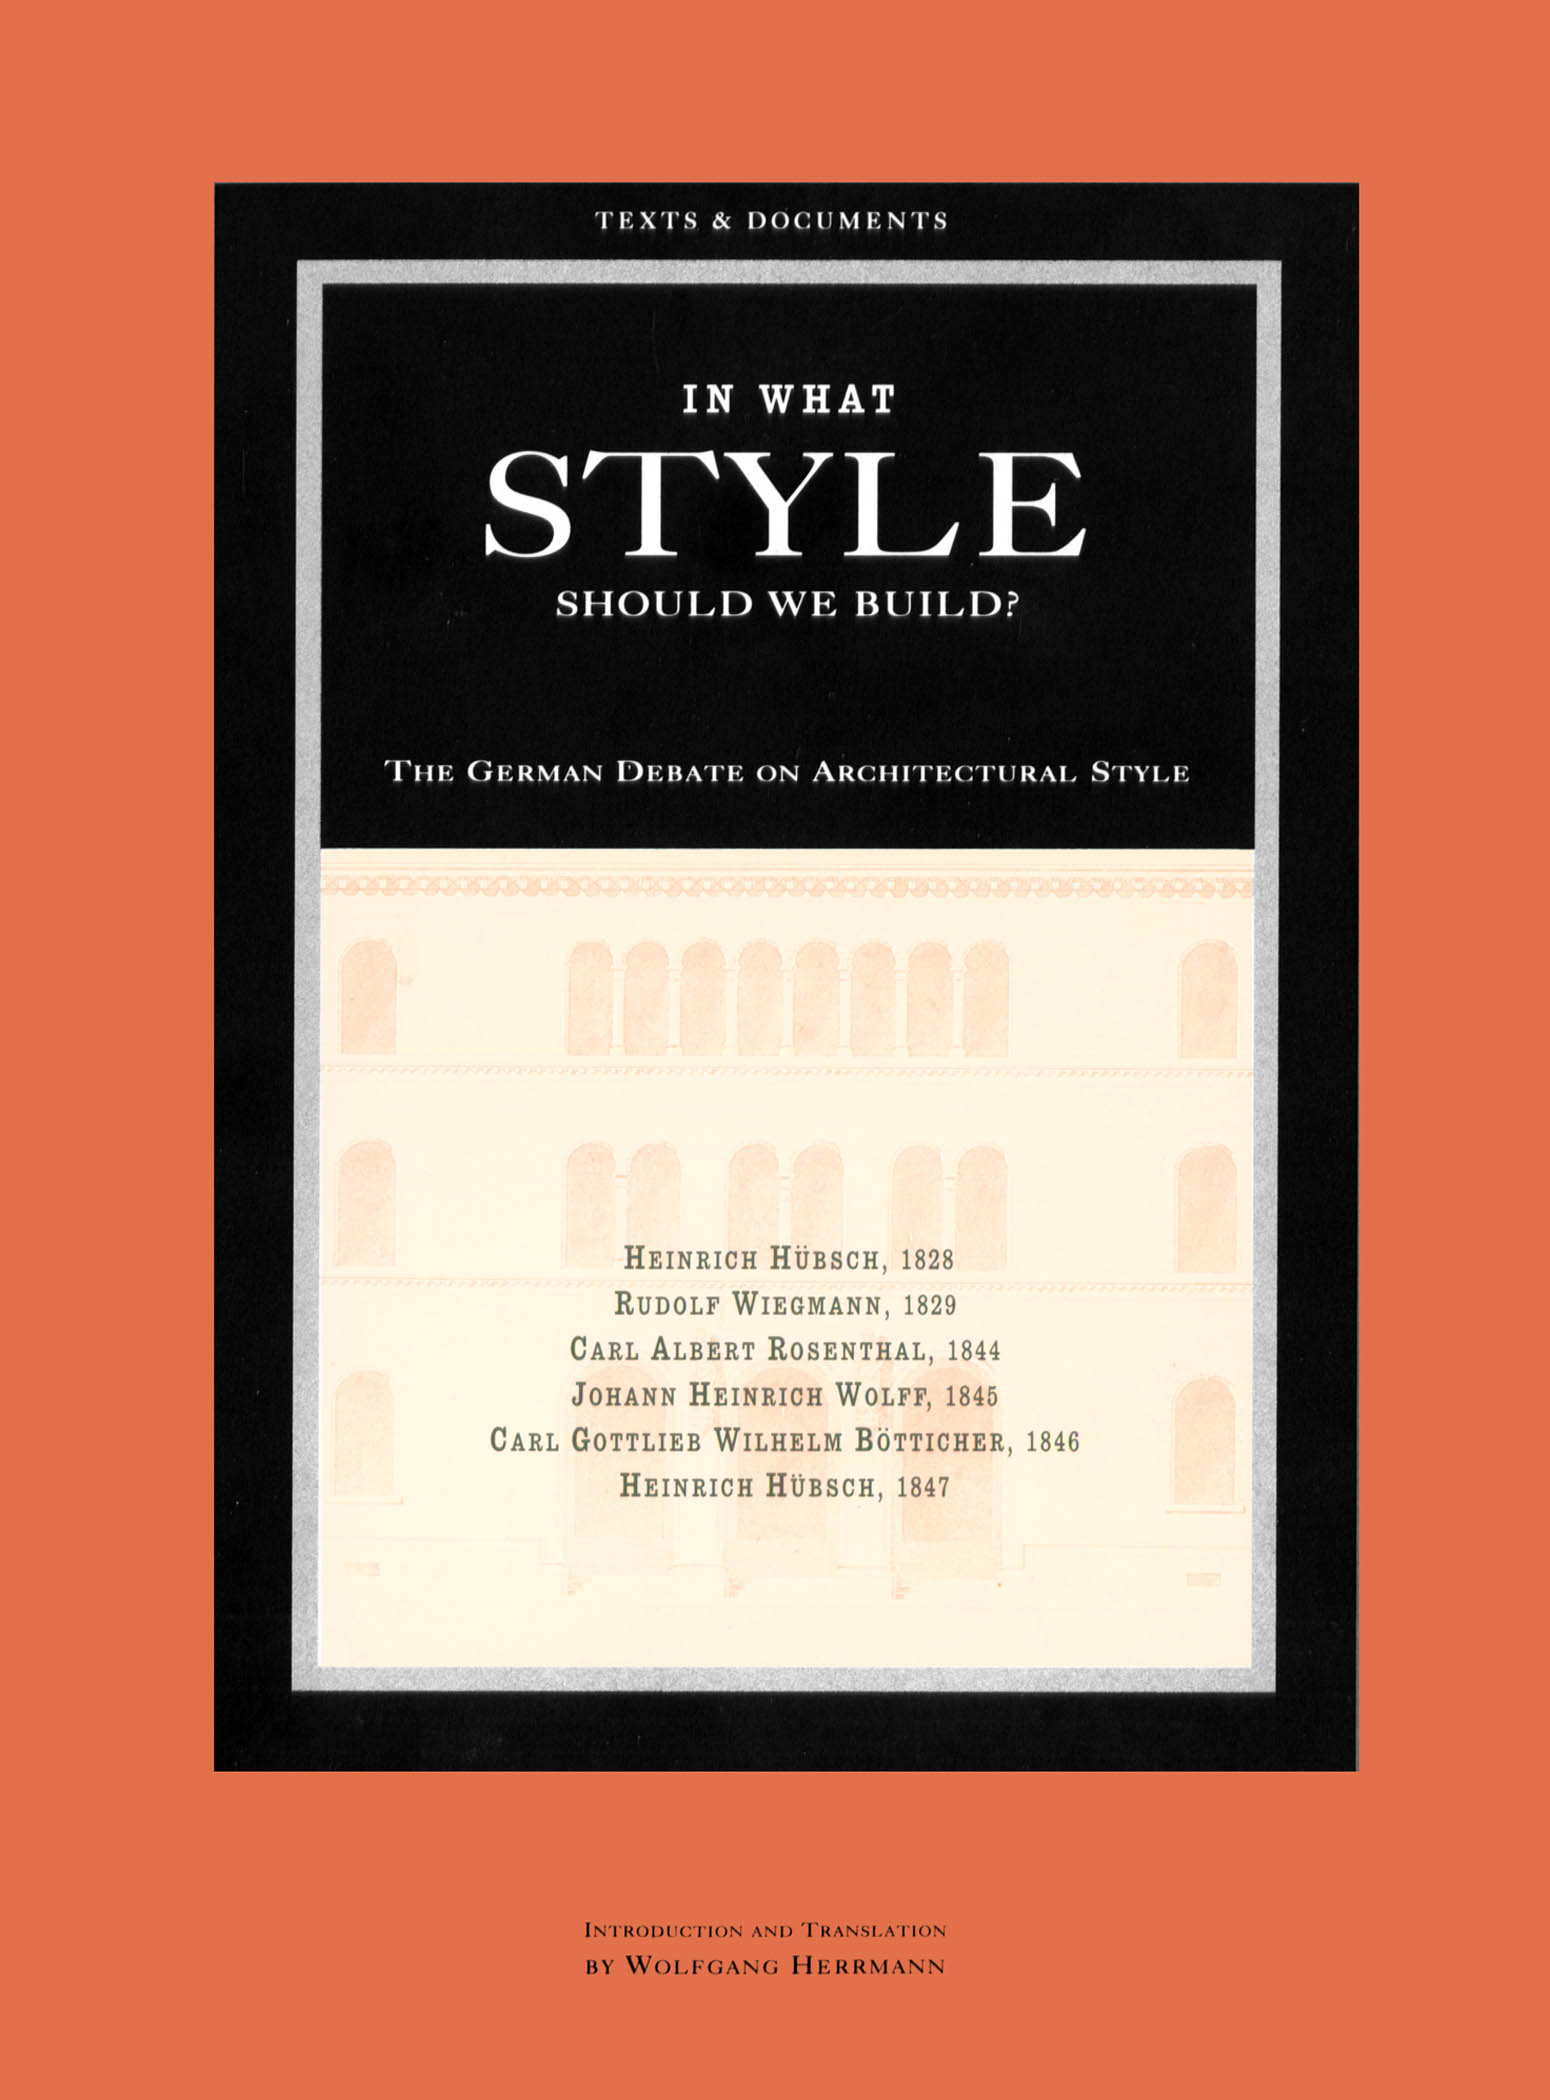 In what style should we build : The German debate on architectural style / Introduction and translation by Wolfgang Herrman. — Santa Monica : The Getty Center for the History of Art and the Humanities, 1992